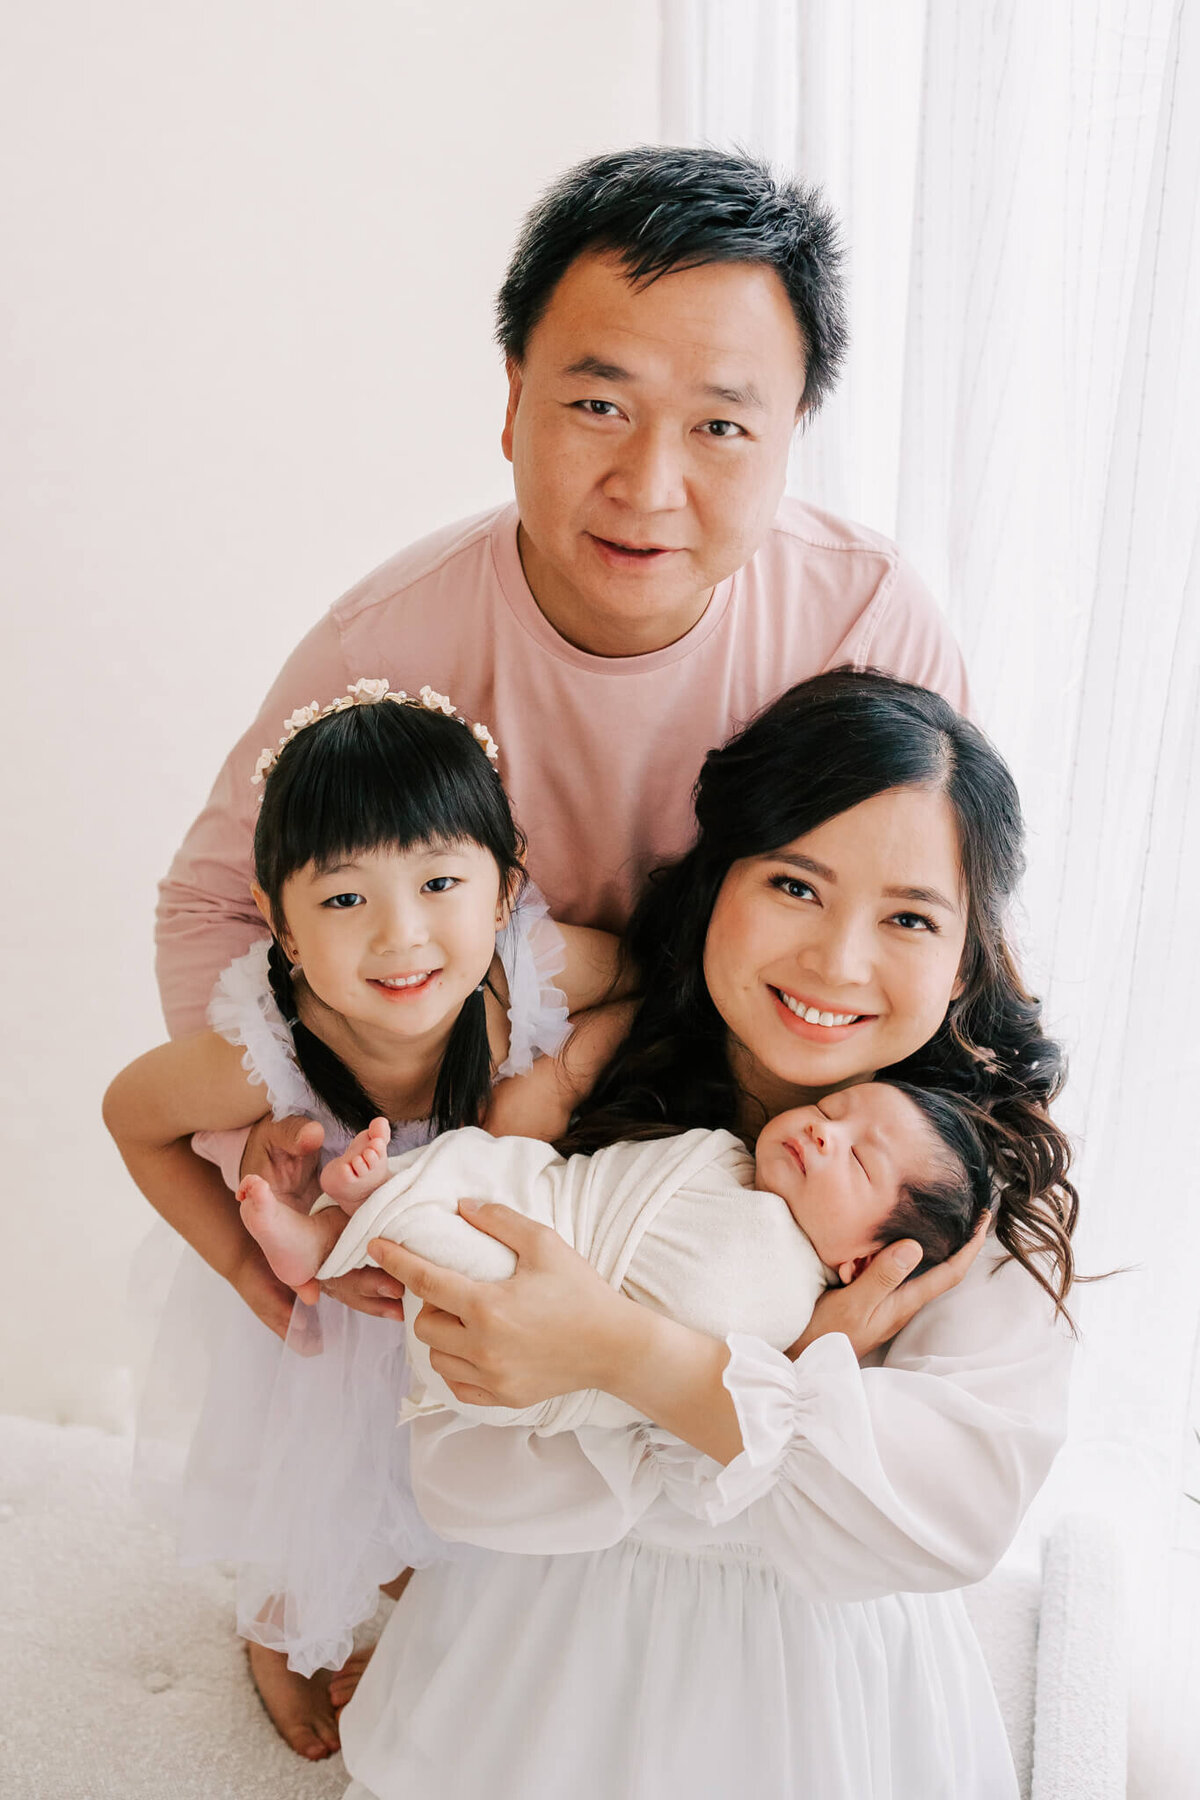 family portrait of a mom, dad, four year old girl, and newborn baby boy. they are all wearing white except for dad who is wearing pink